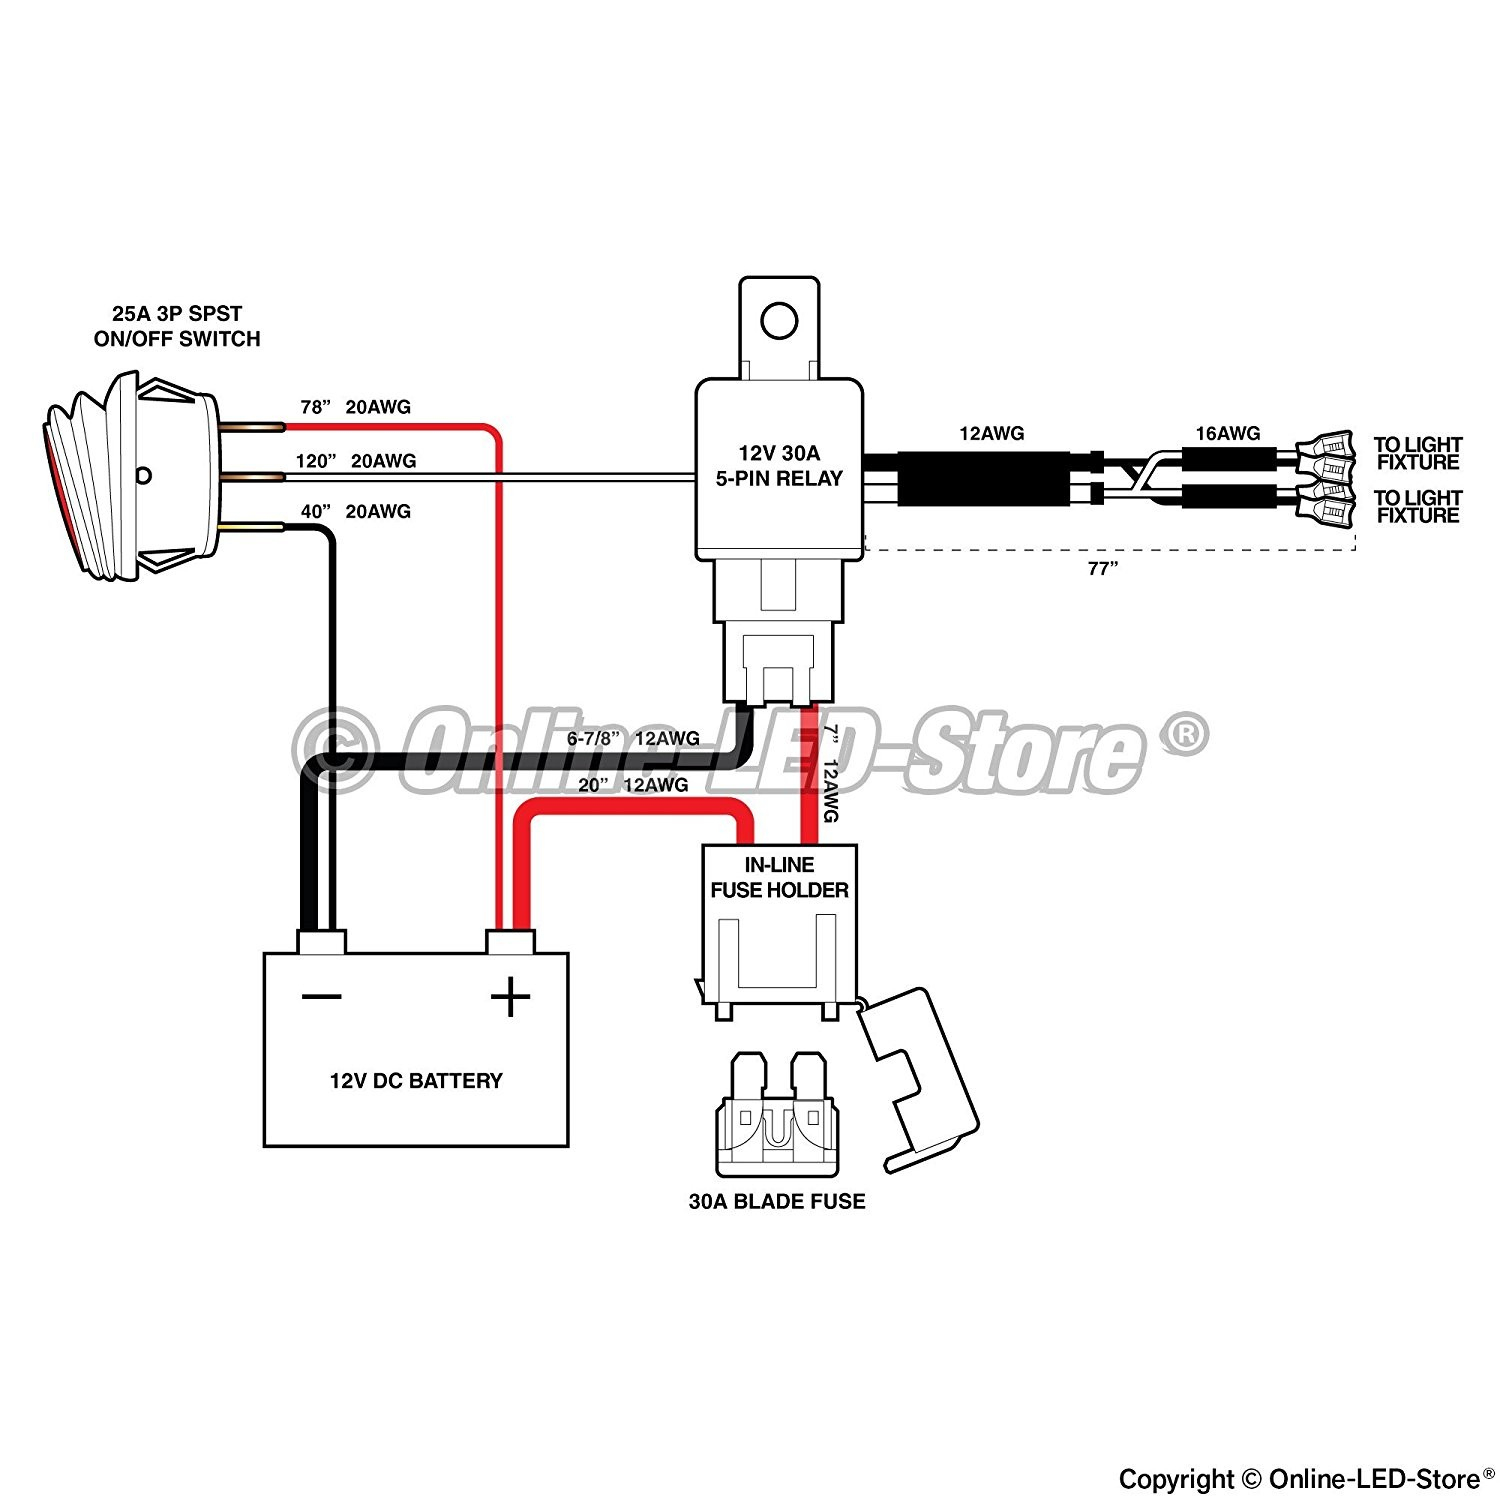 Driving Lights Wiring Diagram | Wiring Library - 5 Pin Relay Wiring Diagram Driving Lights